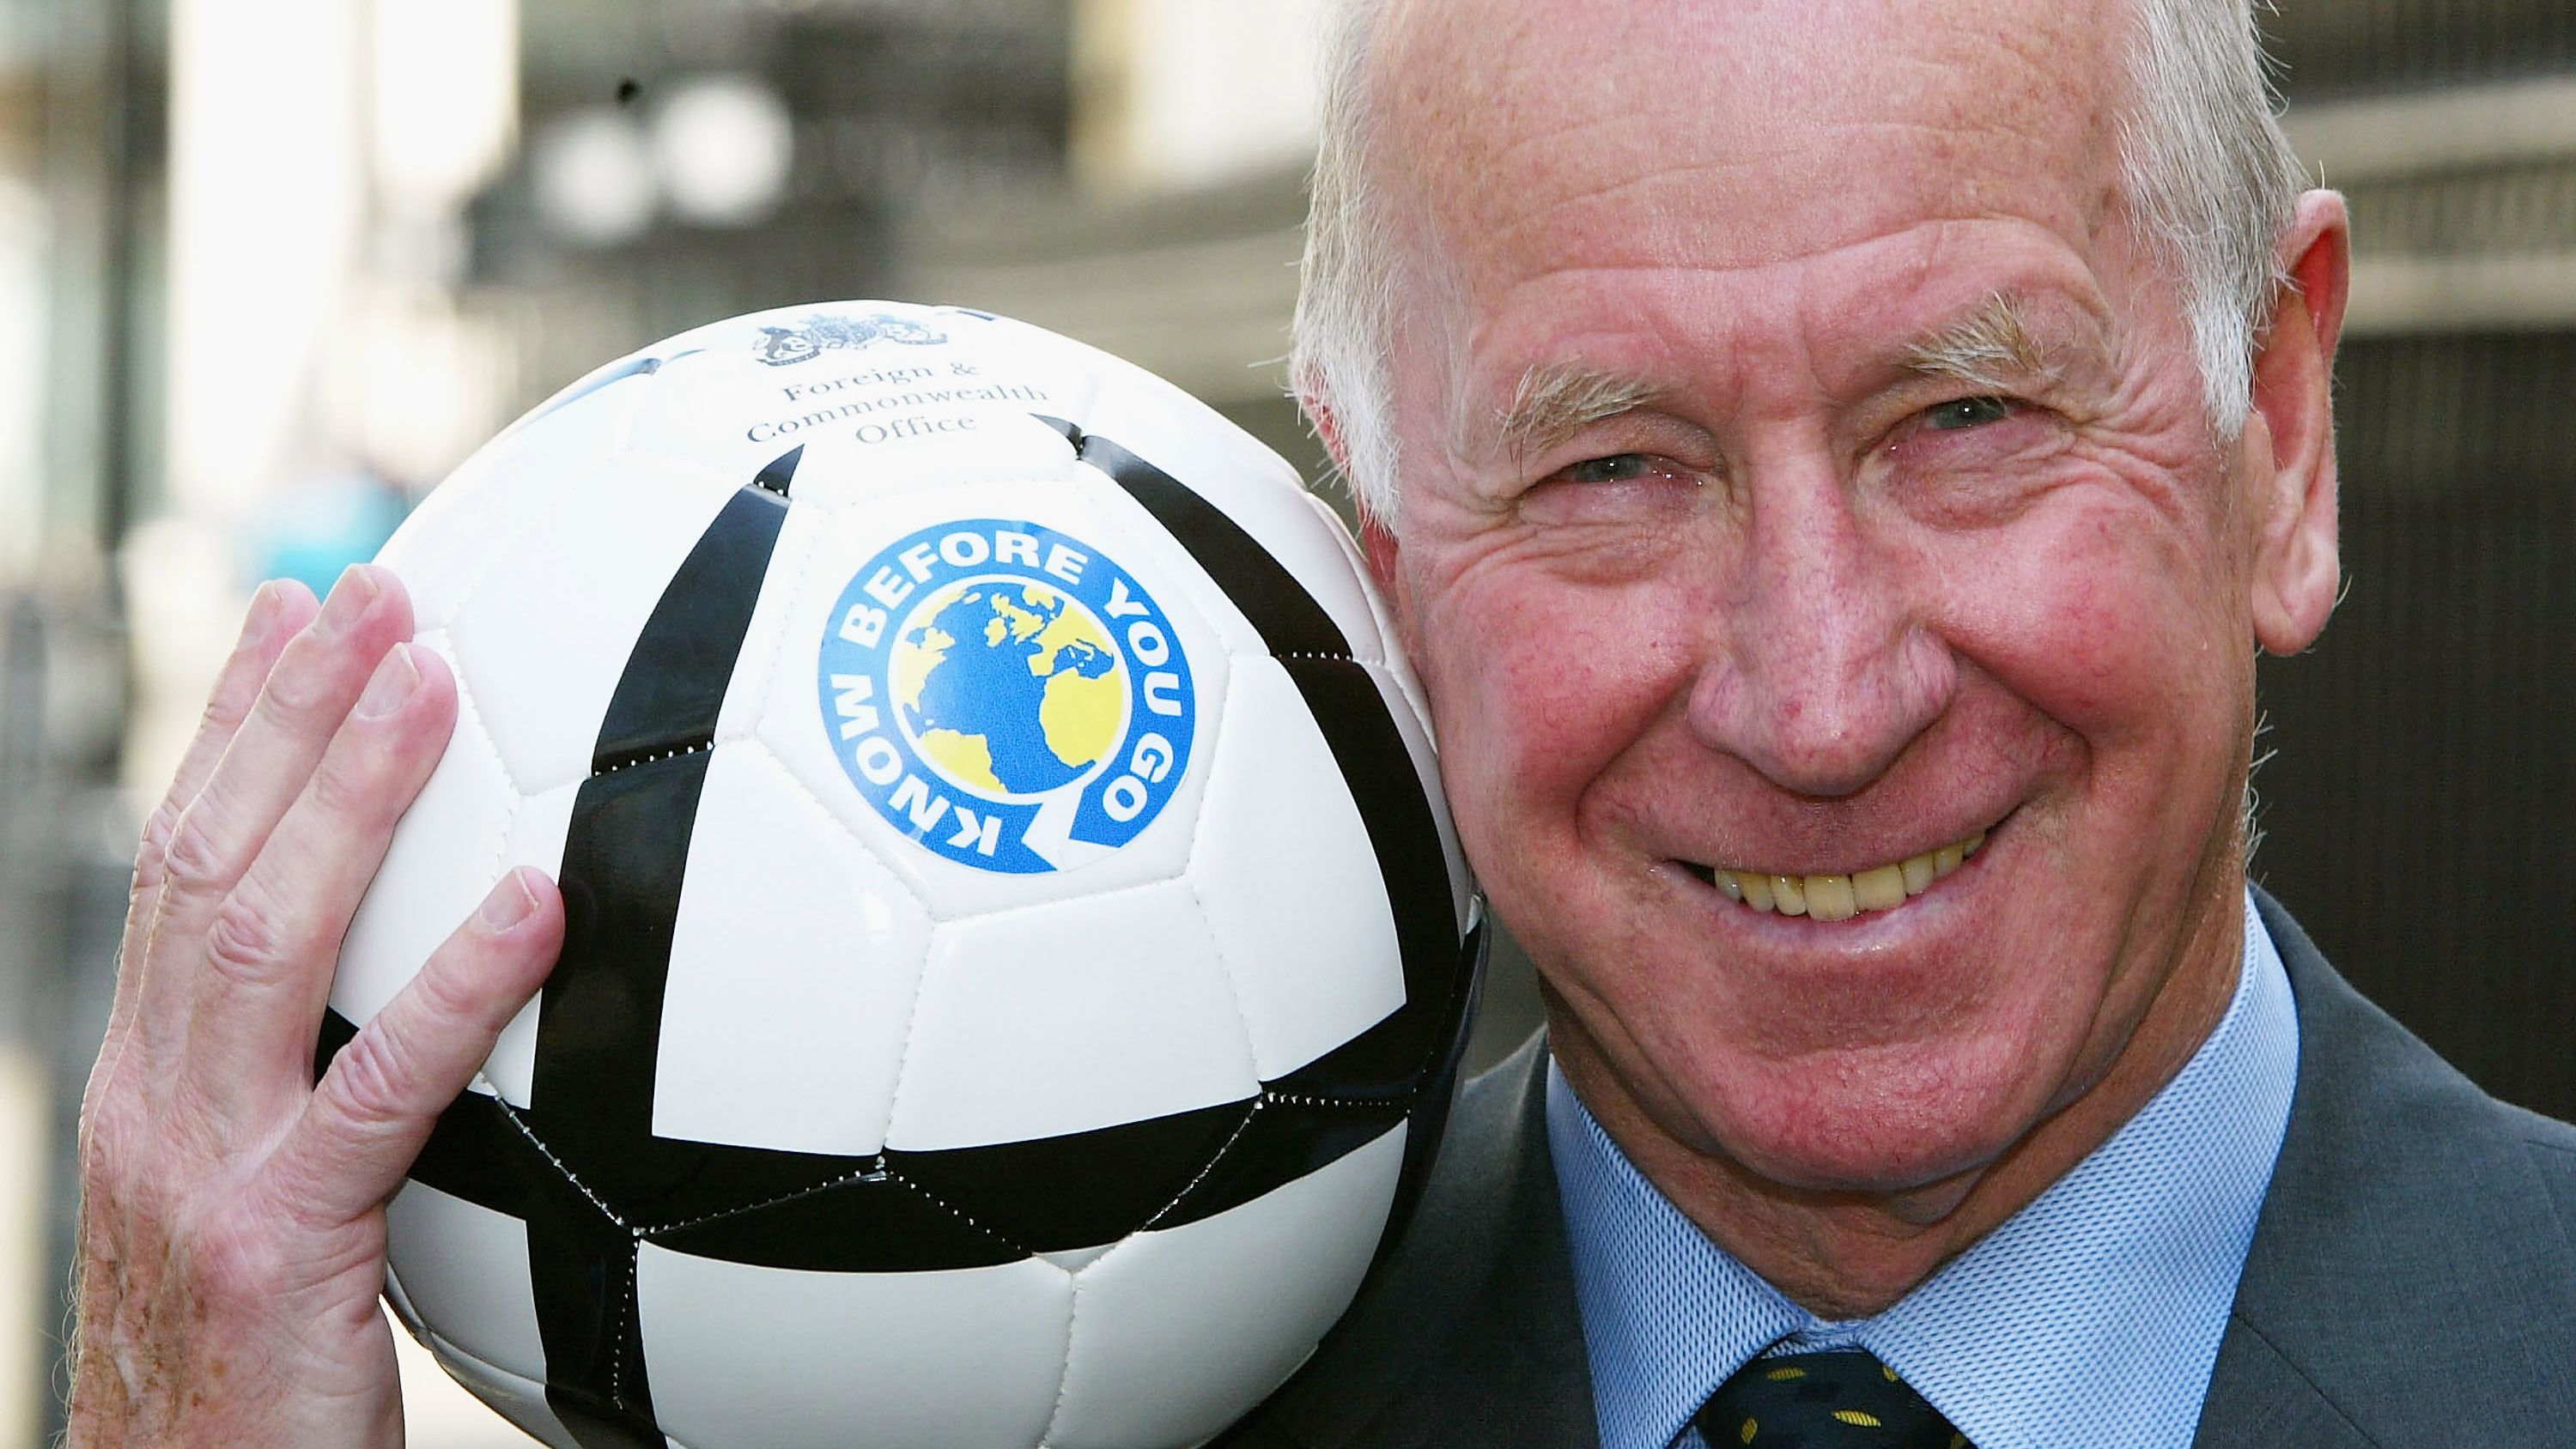 'Without peer': Football world mourns loss of England, Manchester United icon Sir Bobby Charlton